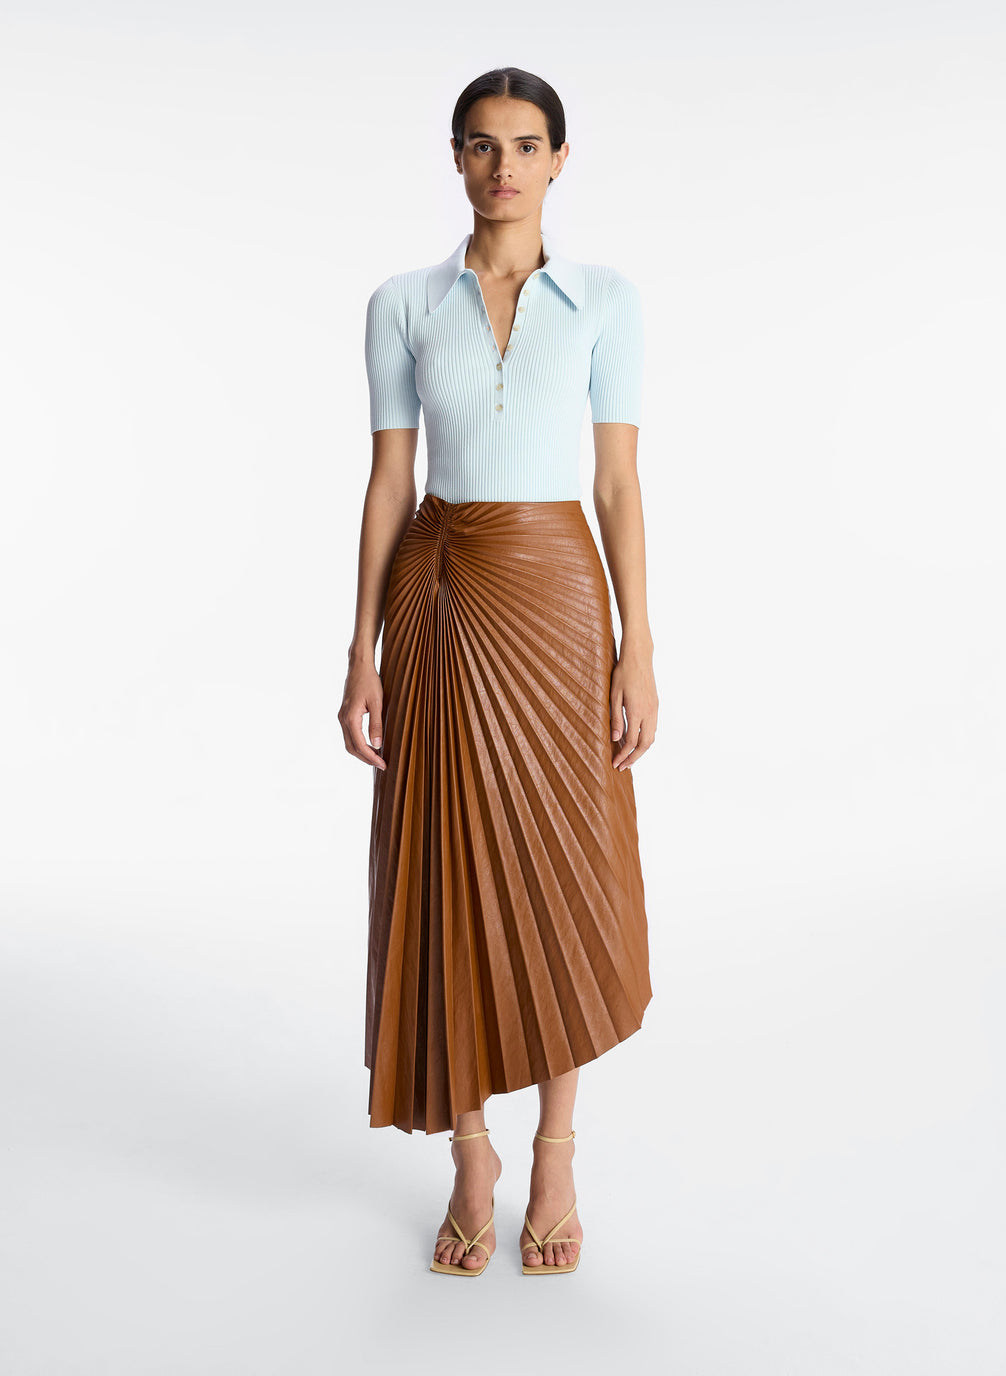 front view of a woman wearing light blue collared shirt with brown pleated vegan leather midi skirt